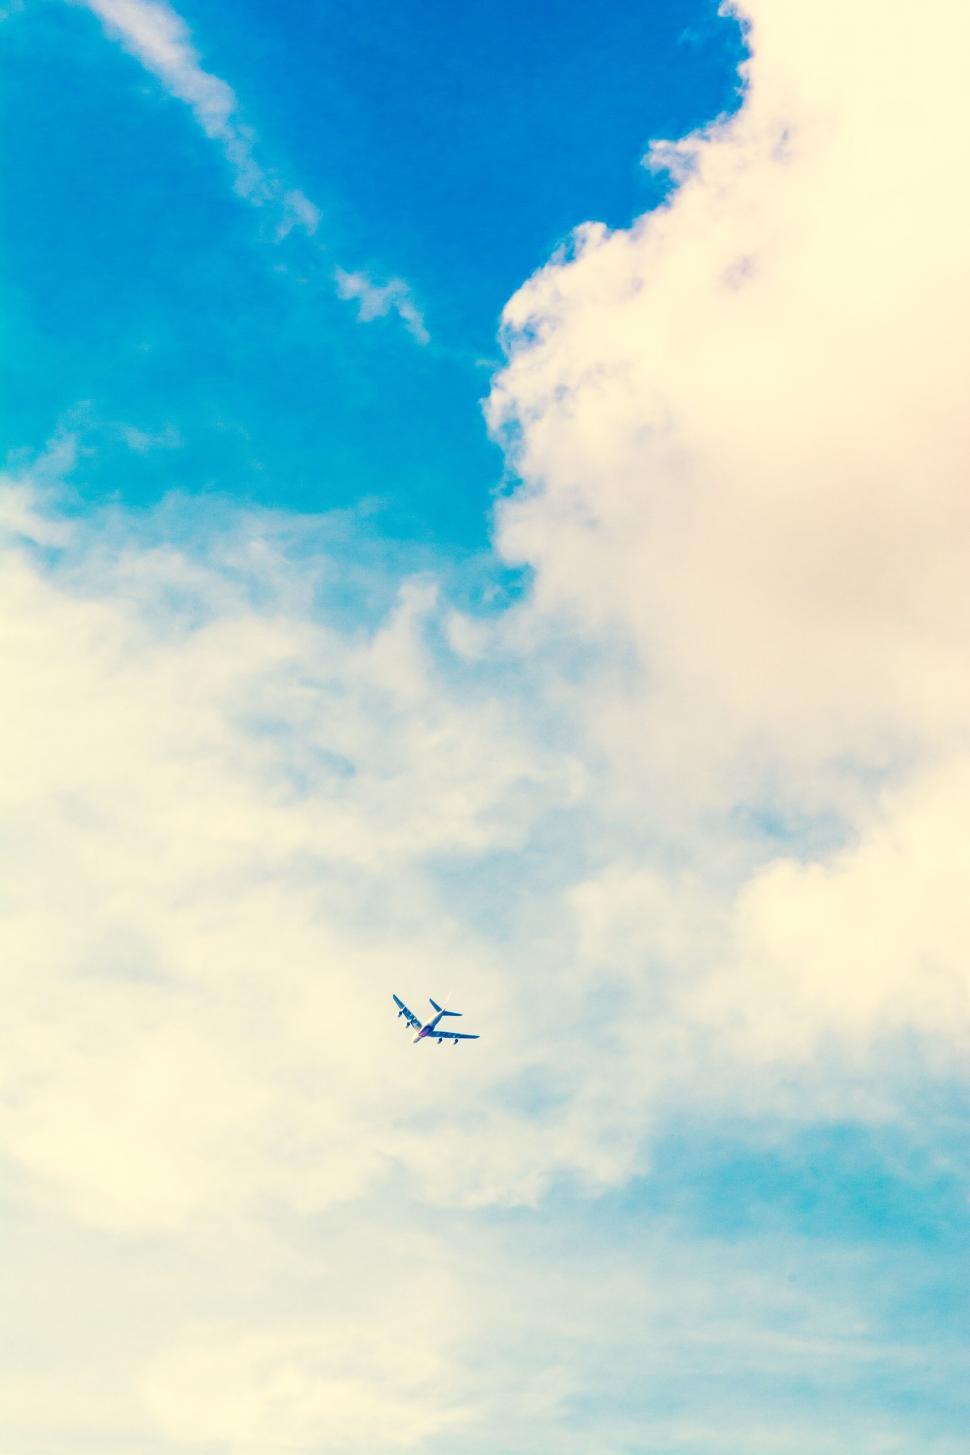 Free Image of An airplane flying in the sky 